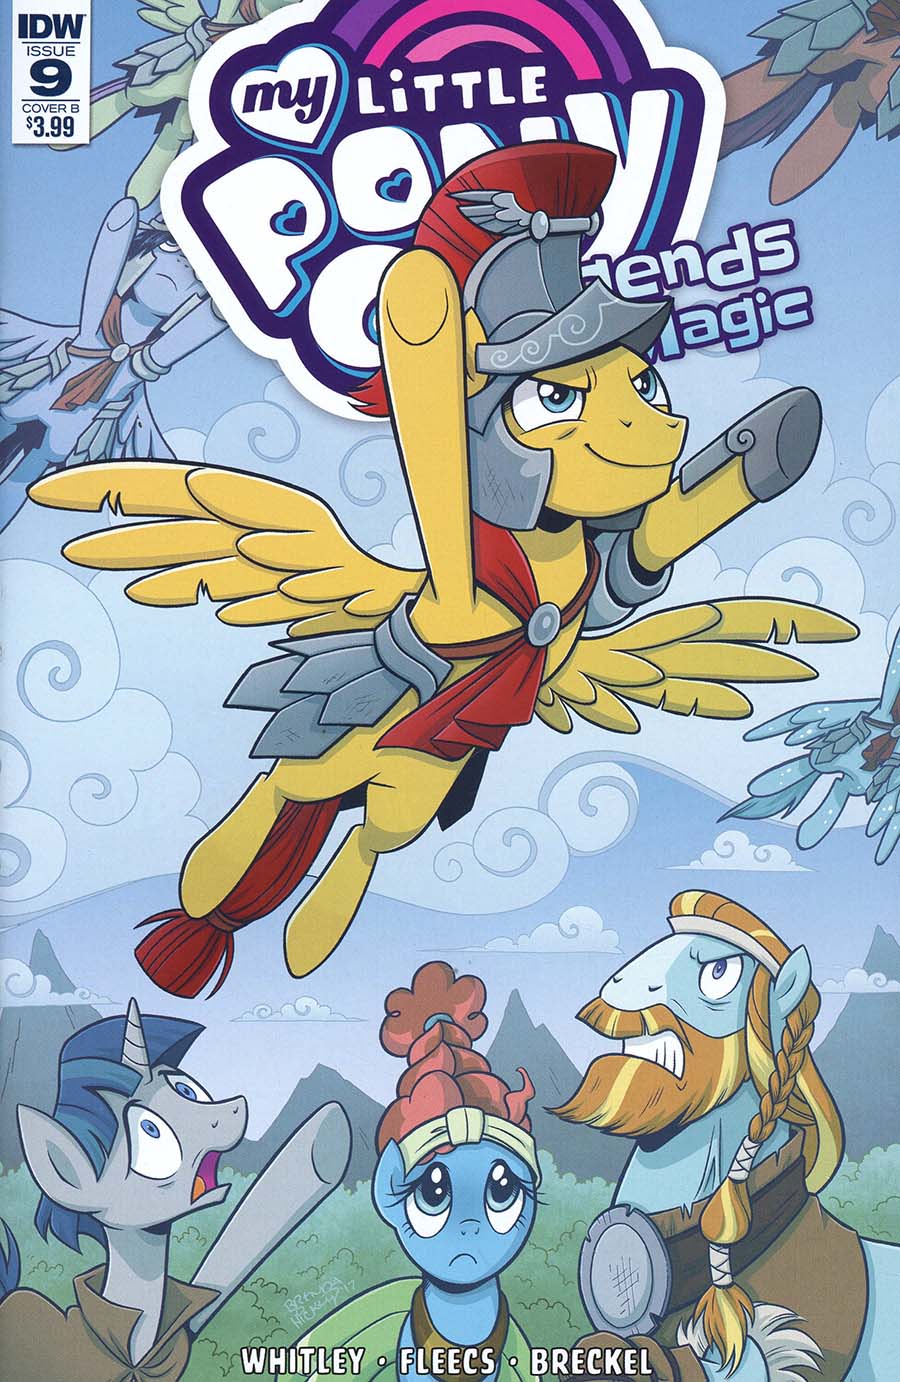 My Little Pony Legends Of Magic #9 Cover B Variant Brenda Hickey Cover